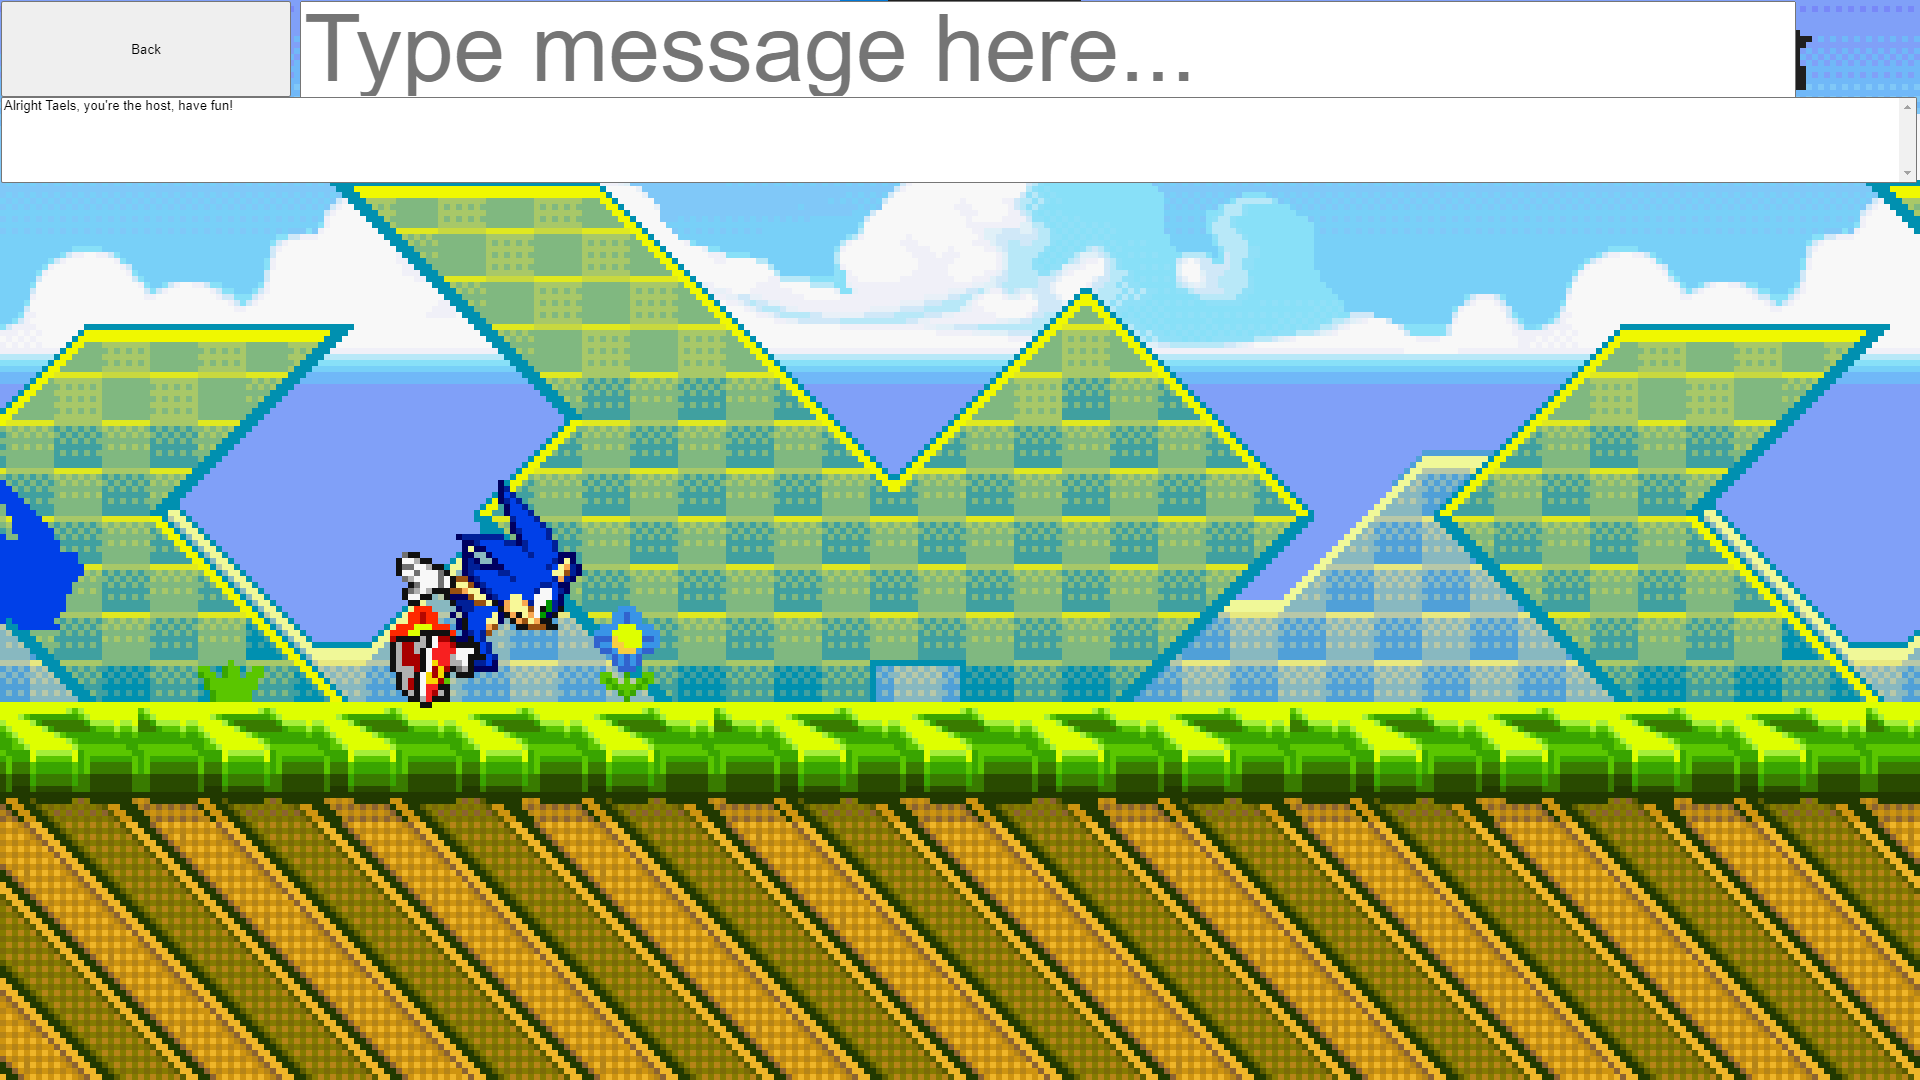 Sonic Advance Network by TaelsDaFoox